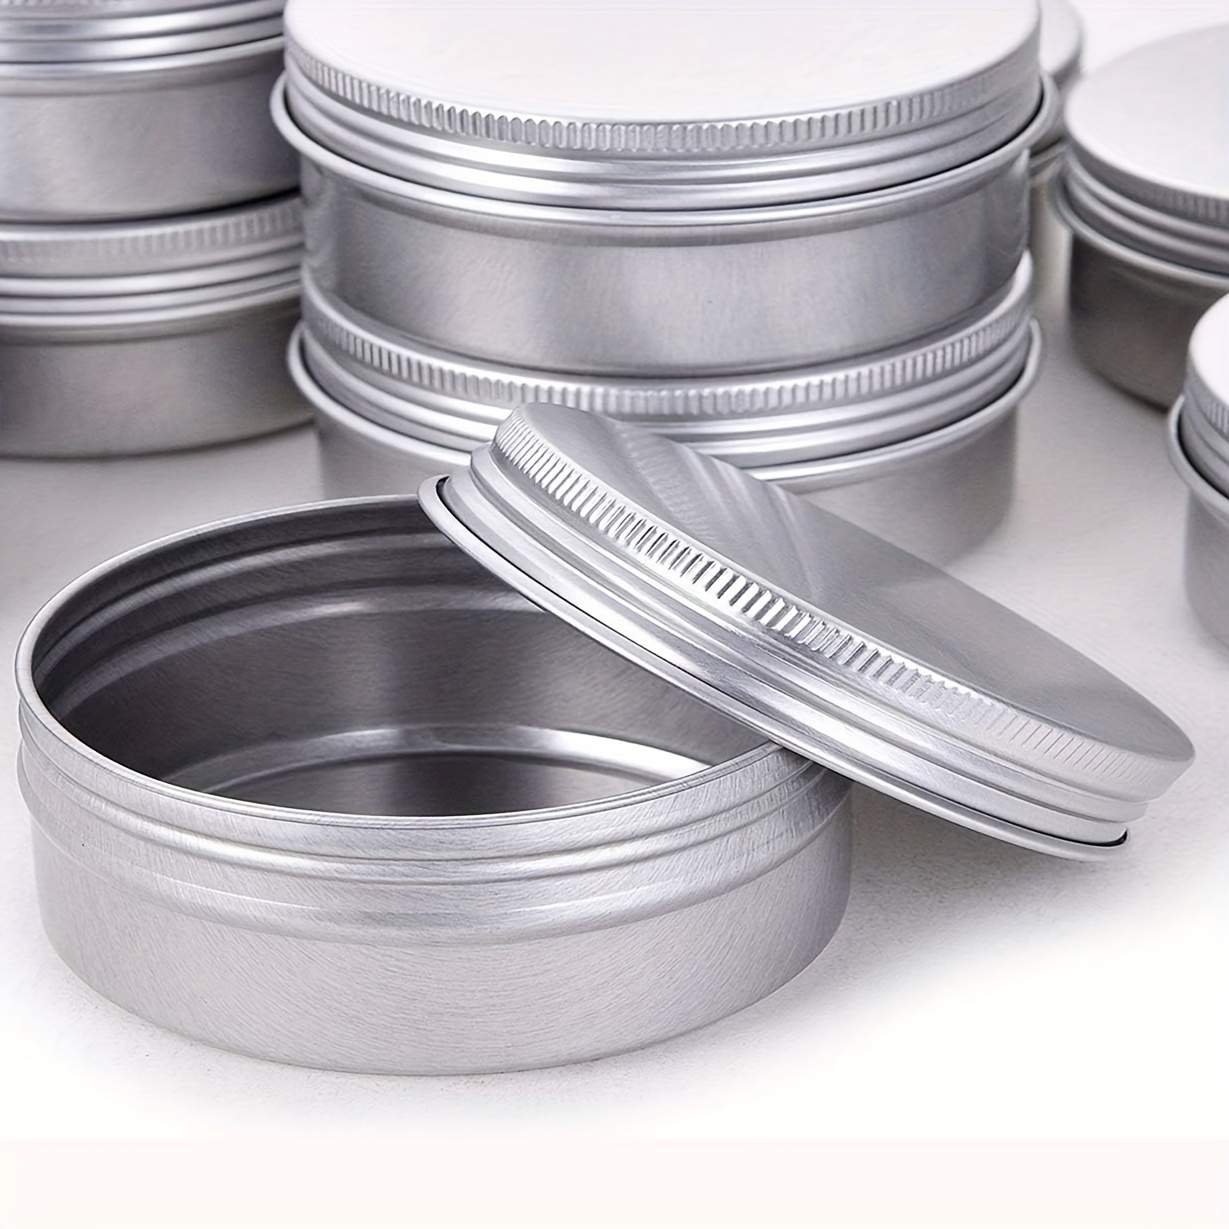 3oz/90ml White Aluminum Tin Jar with Screw Lid 3oz. Containers with Lids 3  Ounce Metal Steel Tin Cosmetic Sample Containers for Lip Balm DIY Salve